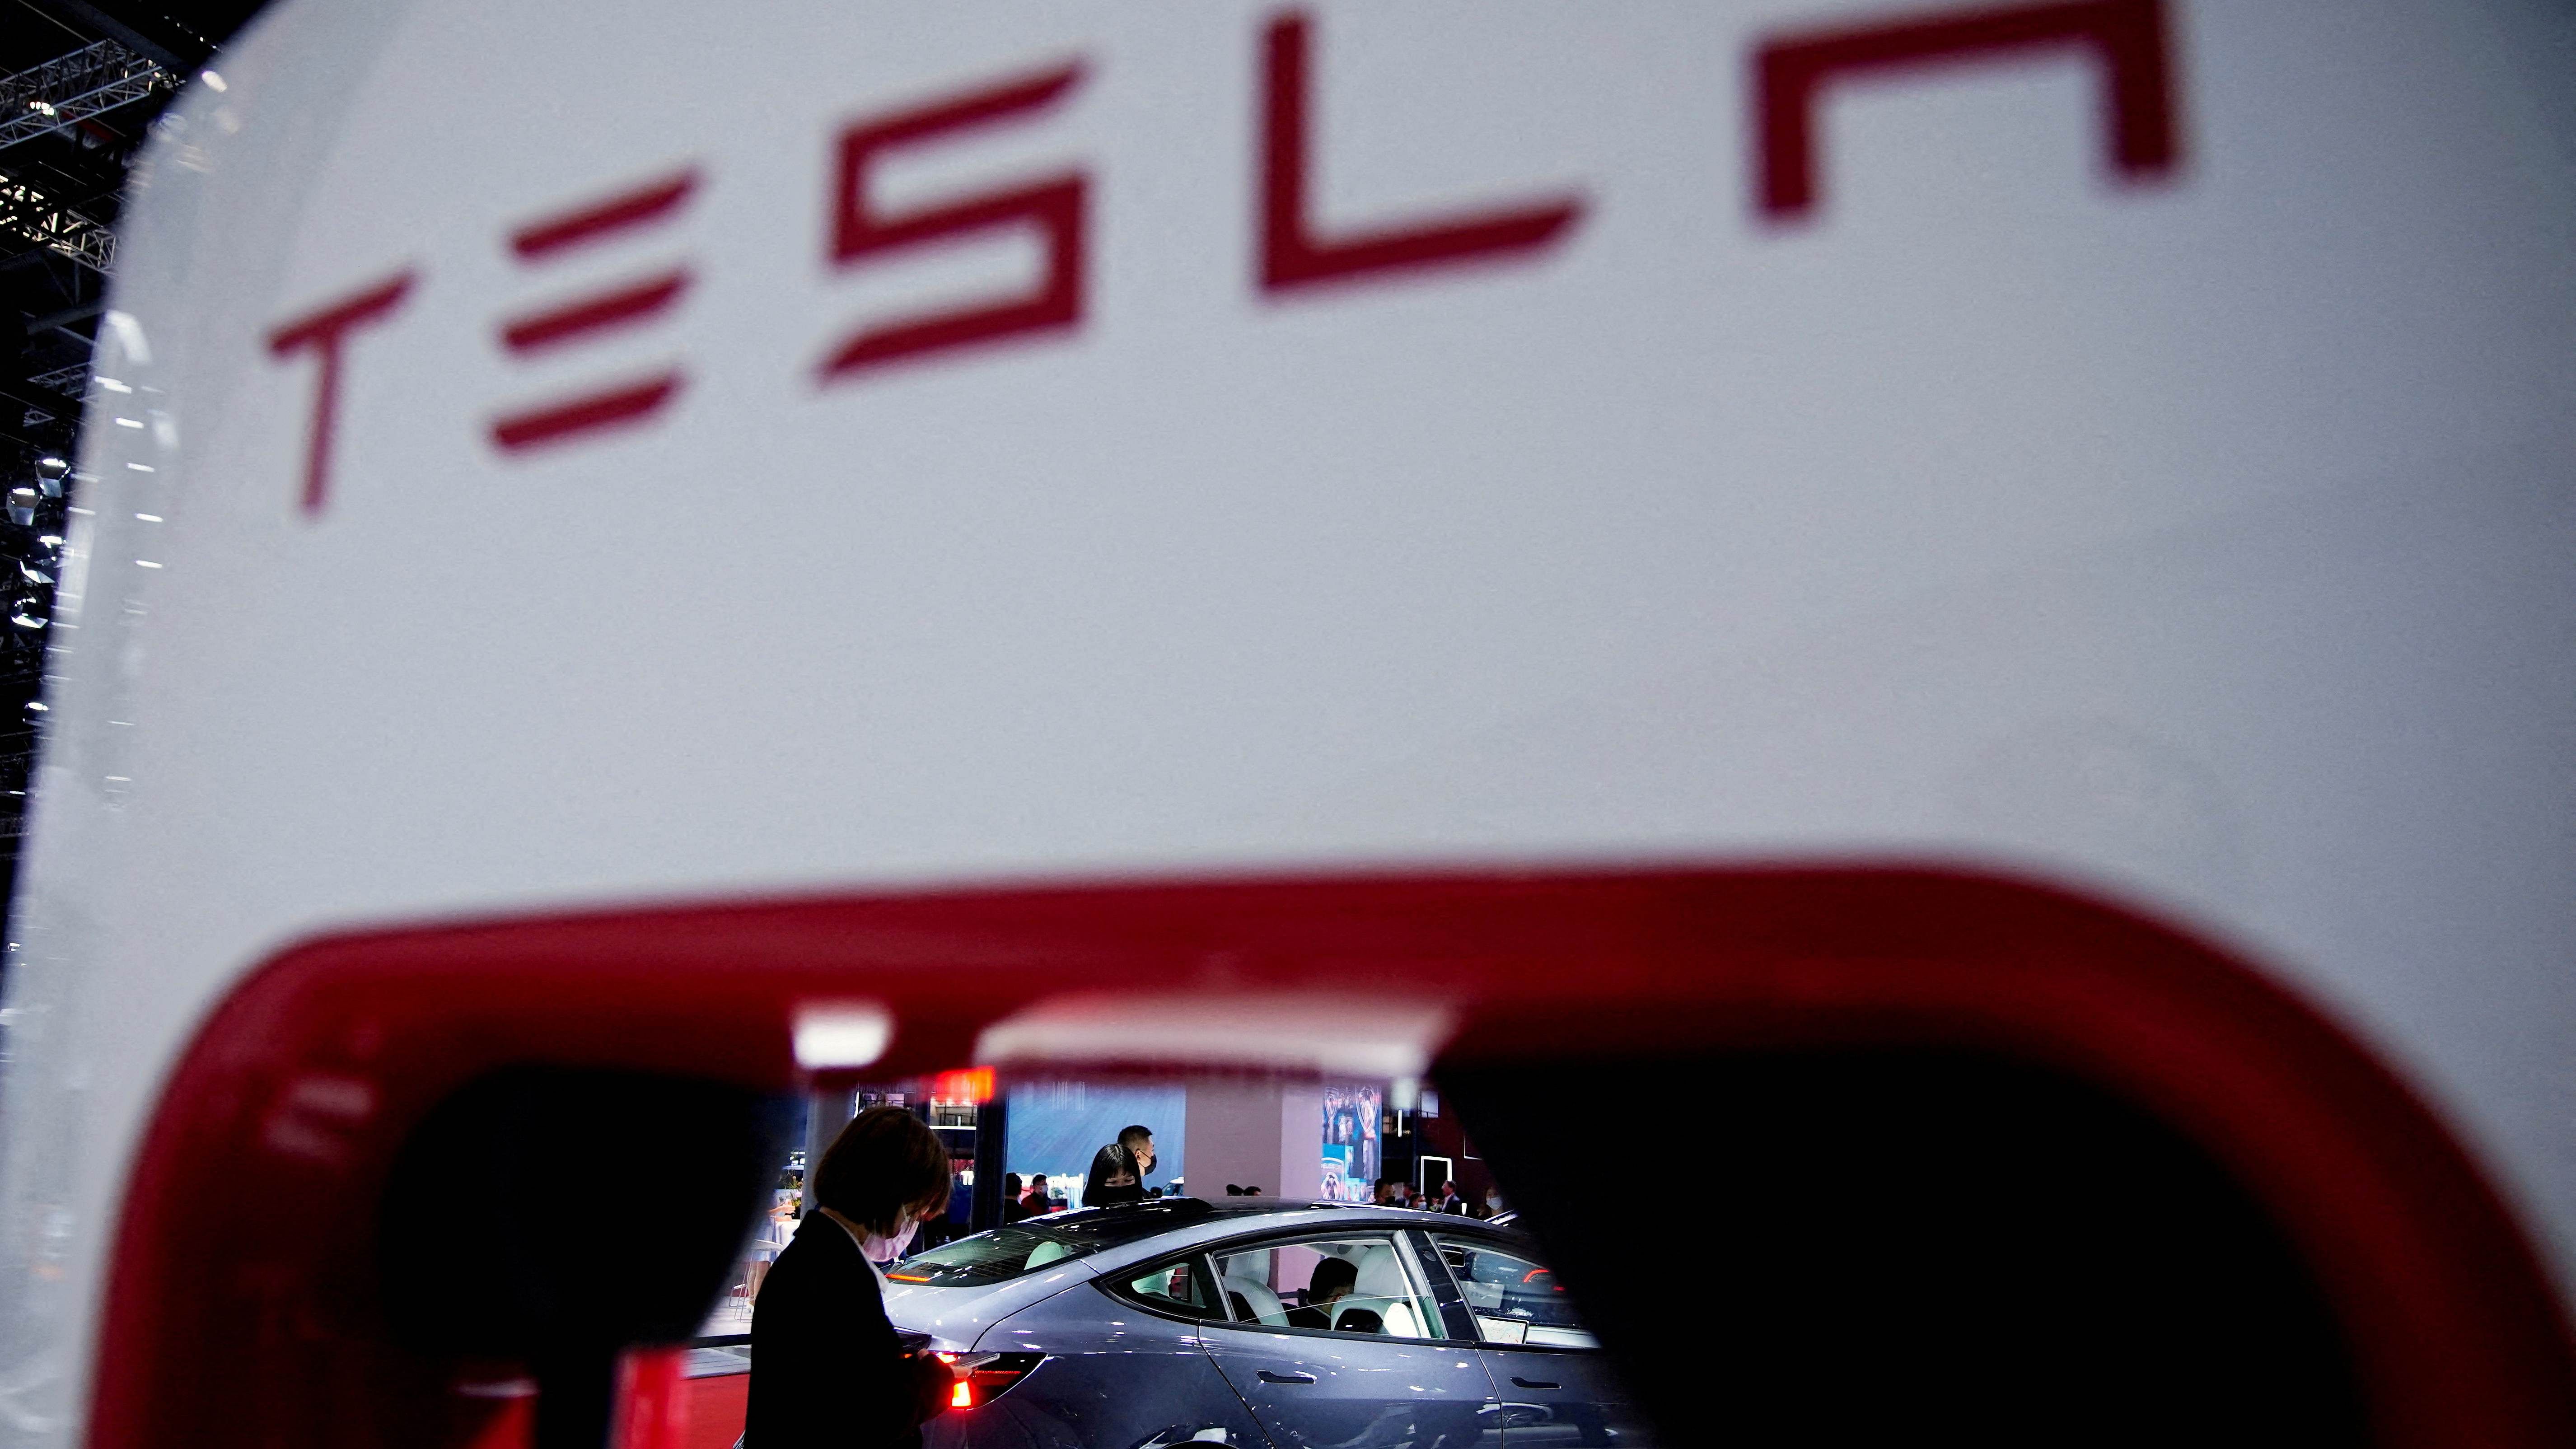 Tesla's competition comes from models such as General Motors Co's Bolt and Bolt EUV, Hyundai Motor Co's Ioniq5, Kia's EV6, Volkswagen AG's ID.4 and Nissan's Leaf, the research firm said. Credit: Reuters Photo